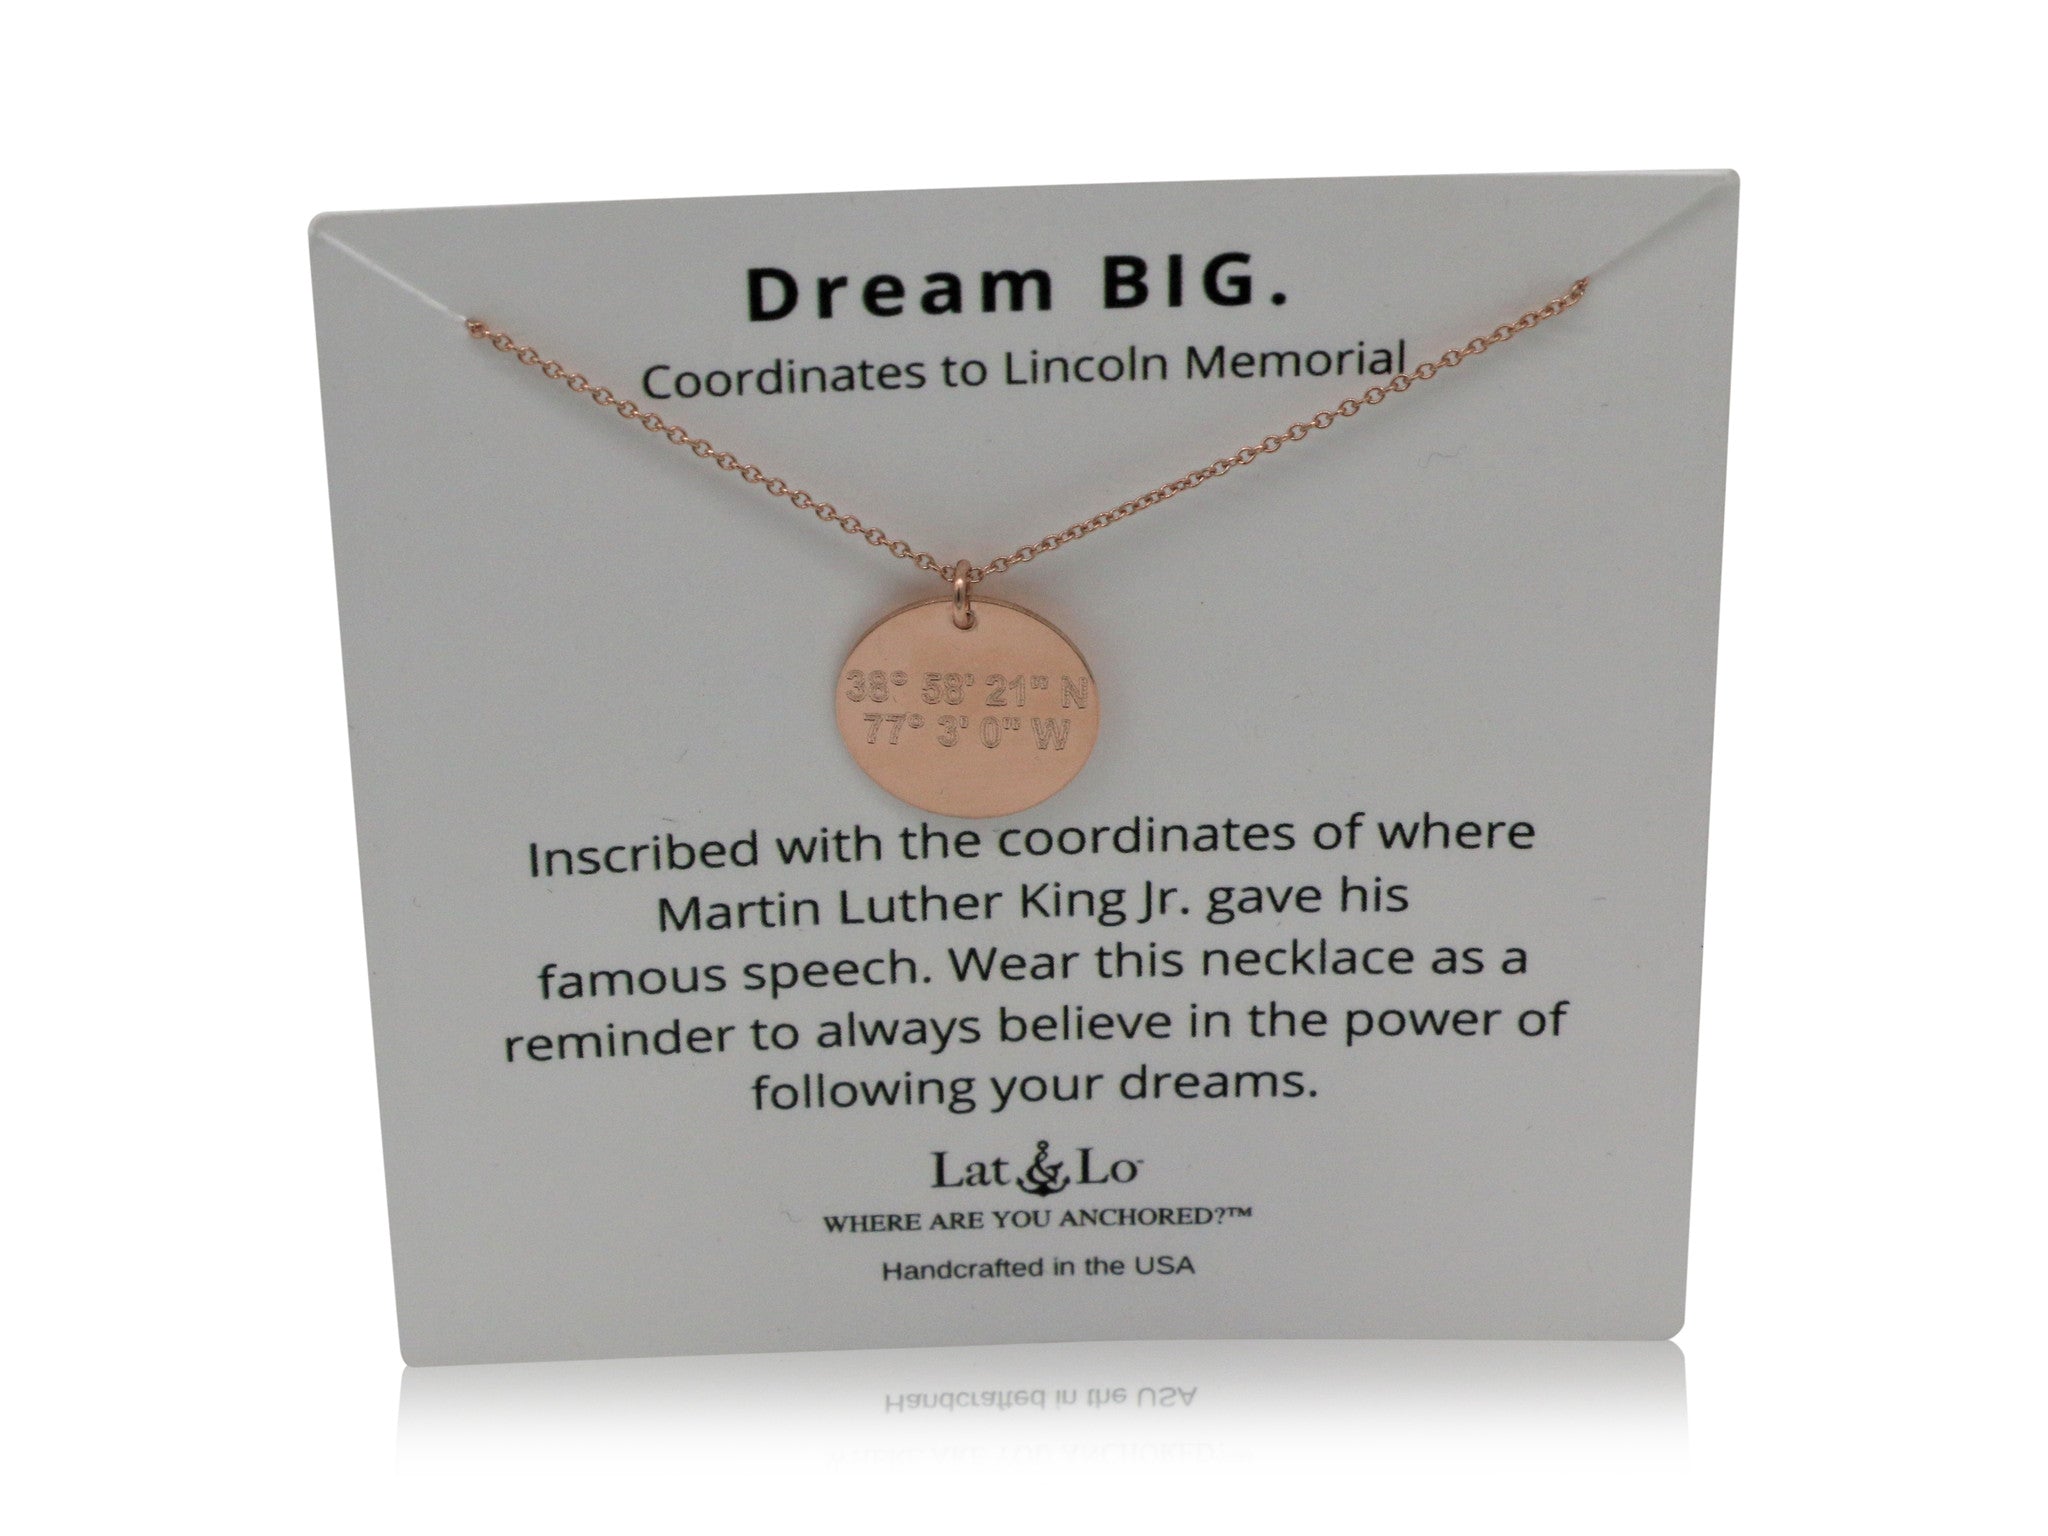 Lat & Lo disc necklace on Dream big, Lincoln Memorial display card, 14K Rose Gold Filled